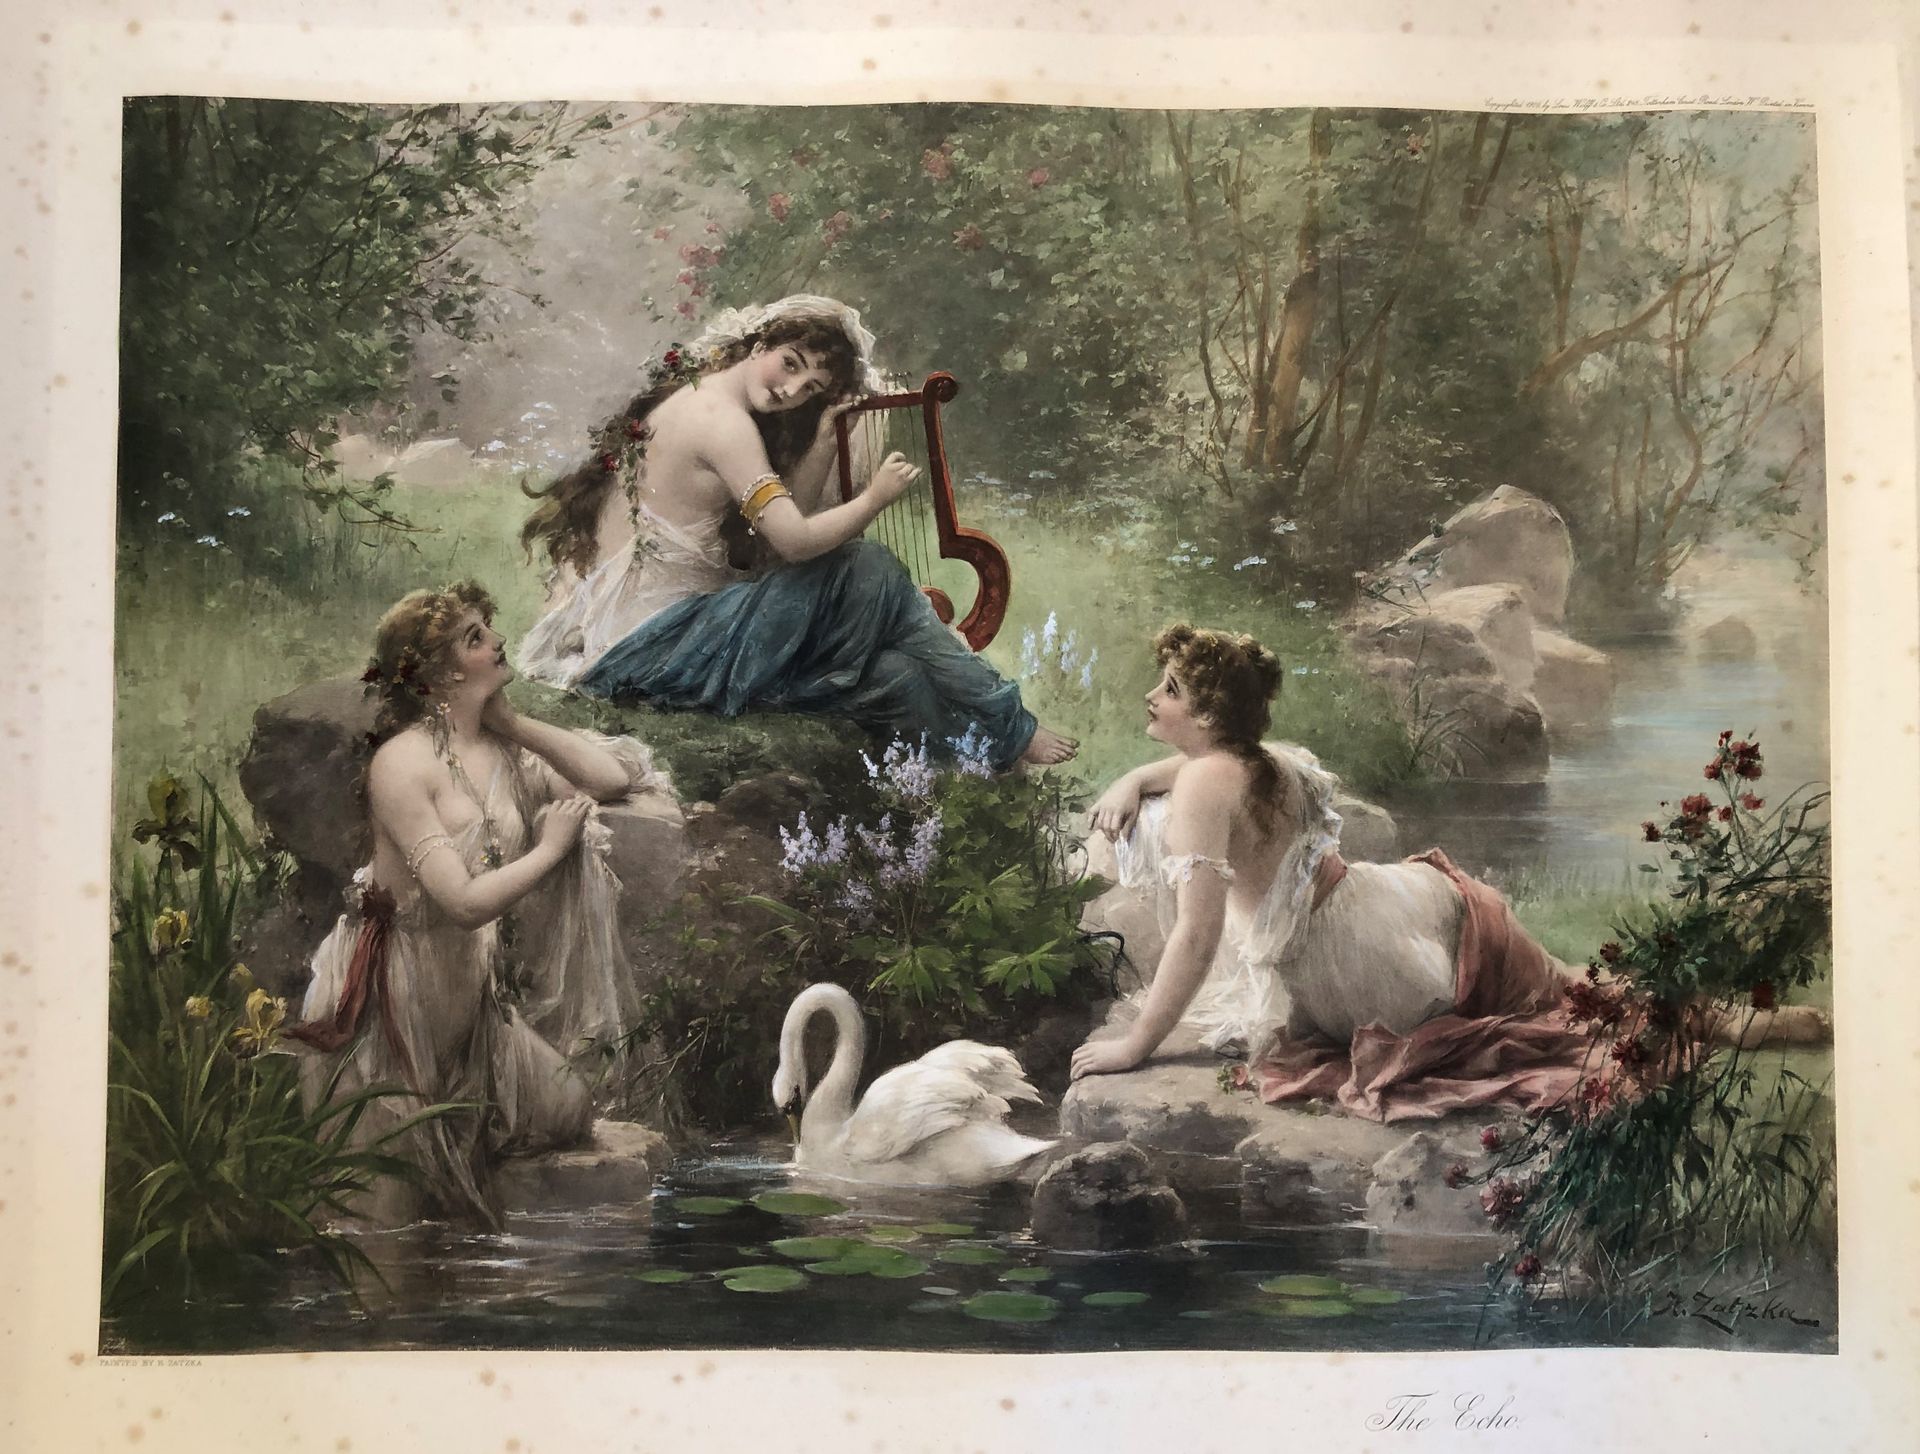 Null Hans ZATZKA (1859-1945)

"The Echo" 

LITHOGRAPHY in colors, signed in the &hellip;